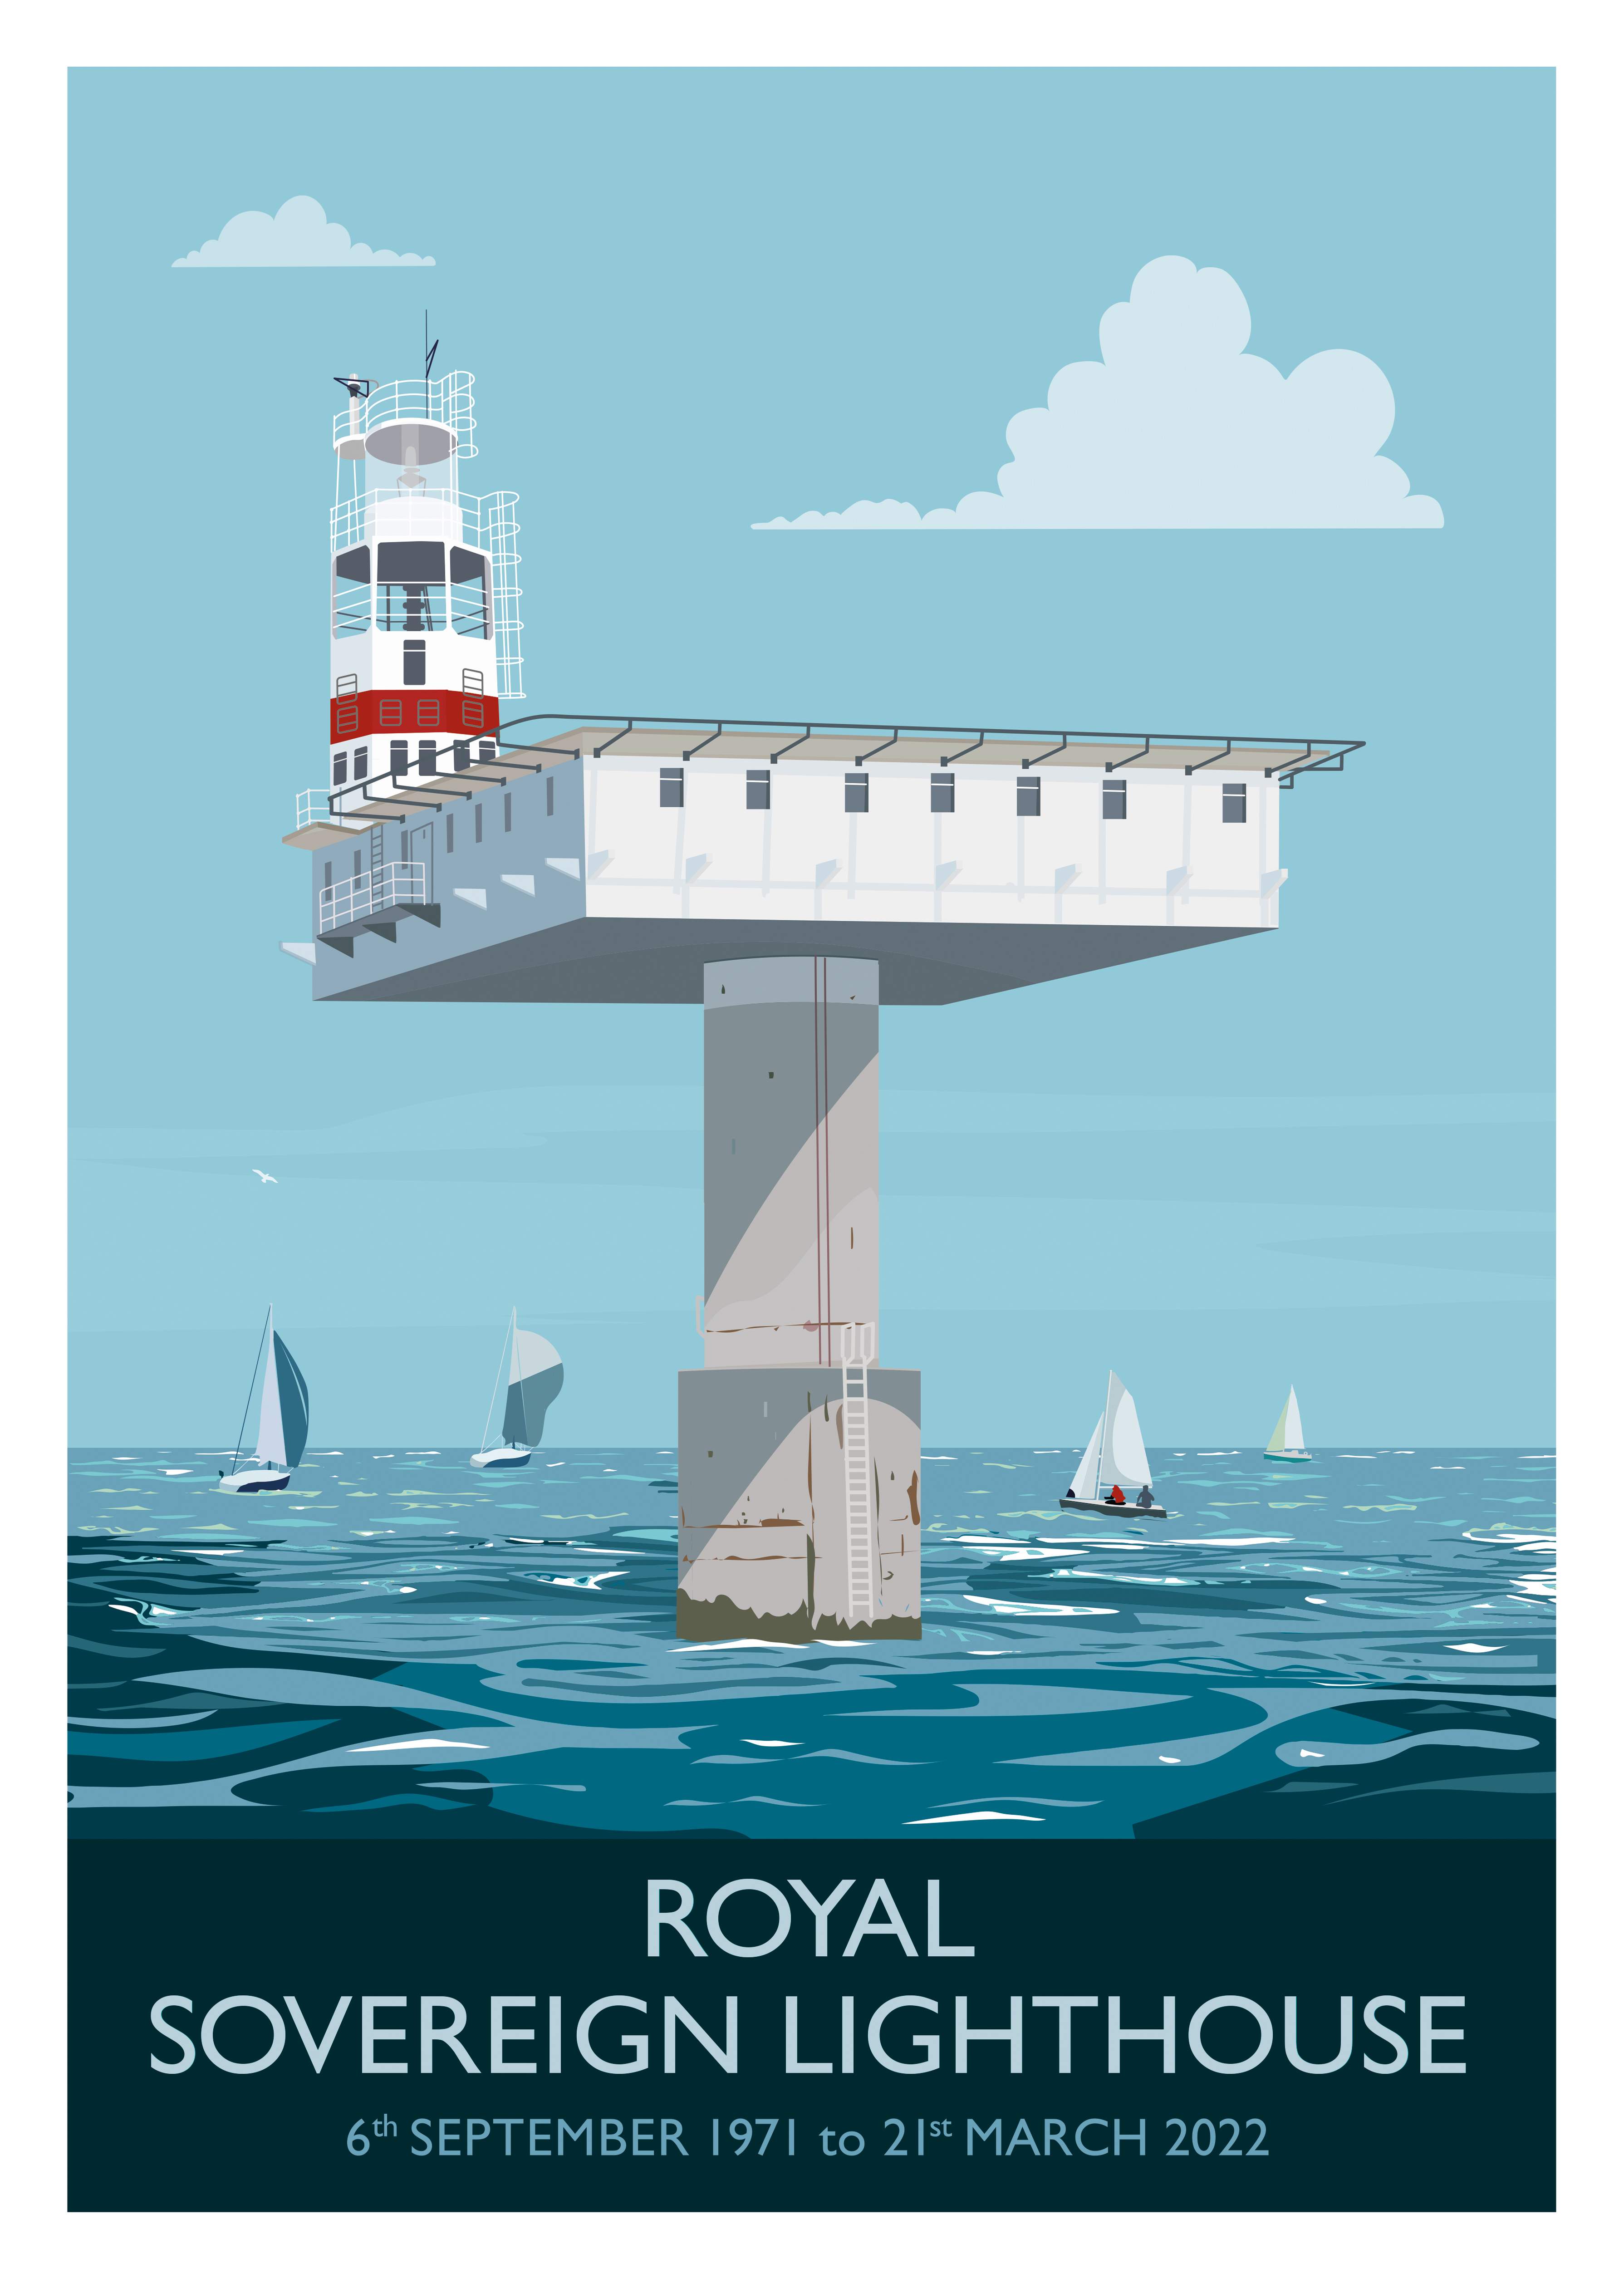 New Royal Sovereign Lighthouse Poster, celebrating it's years in service